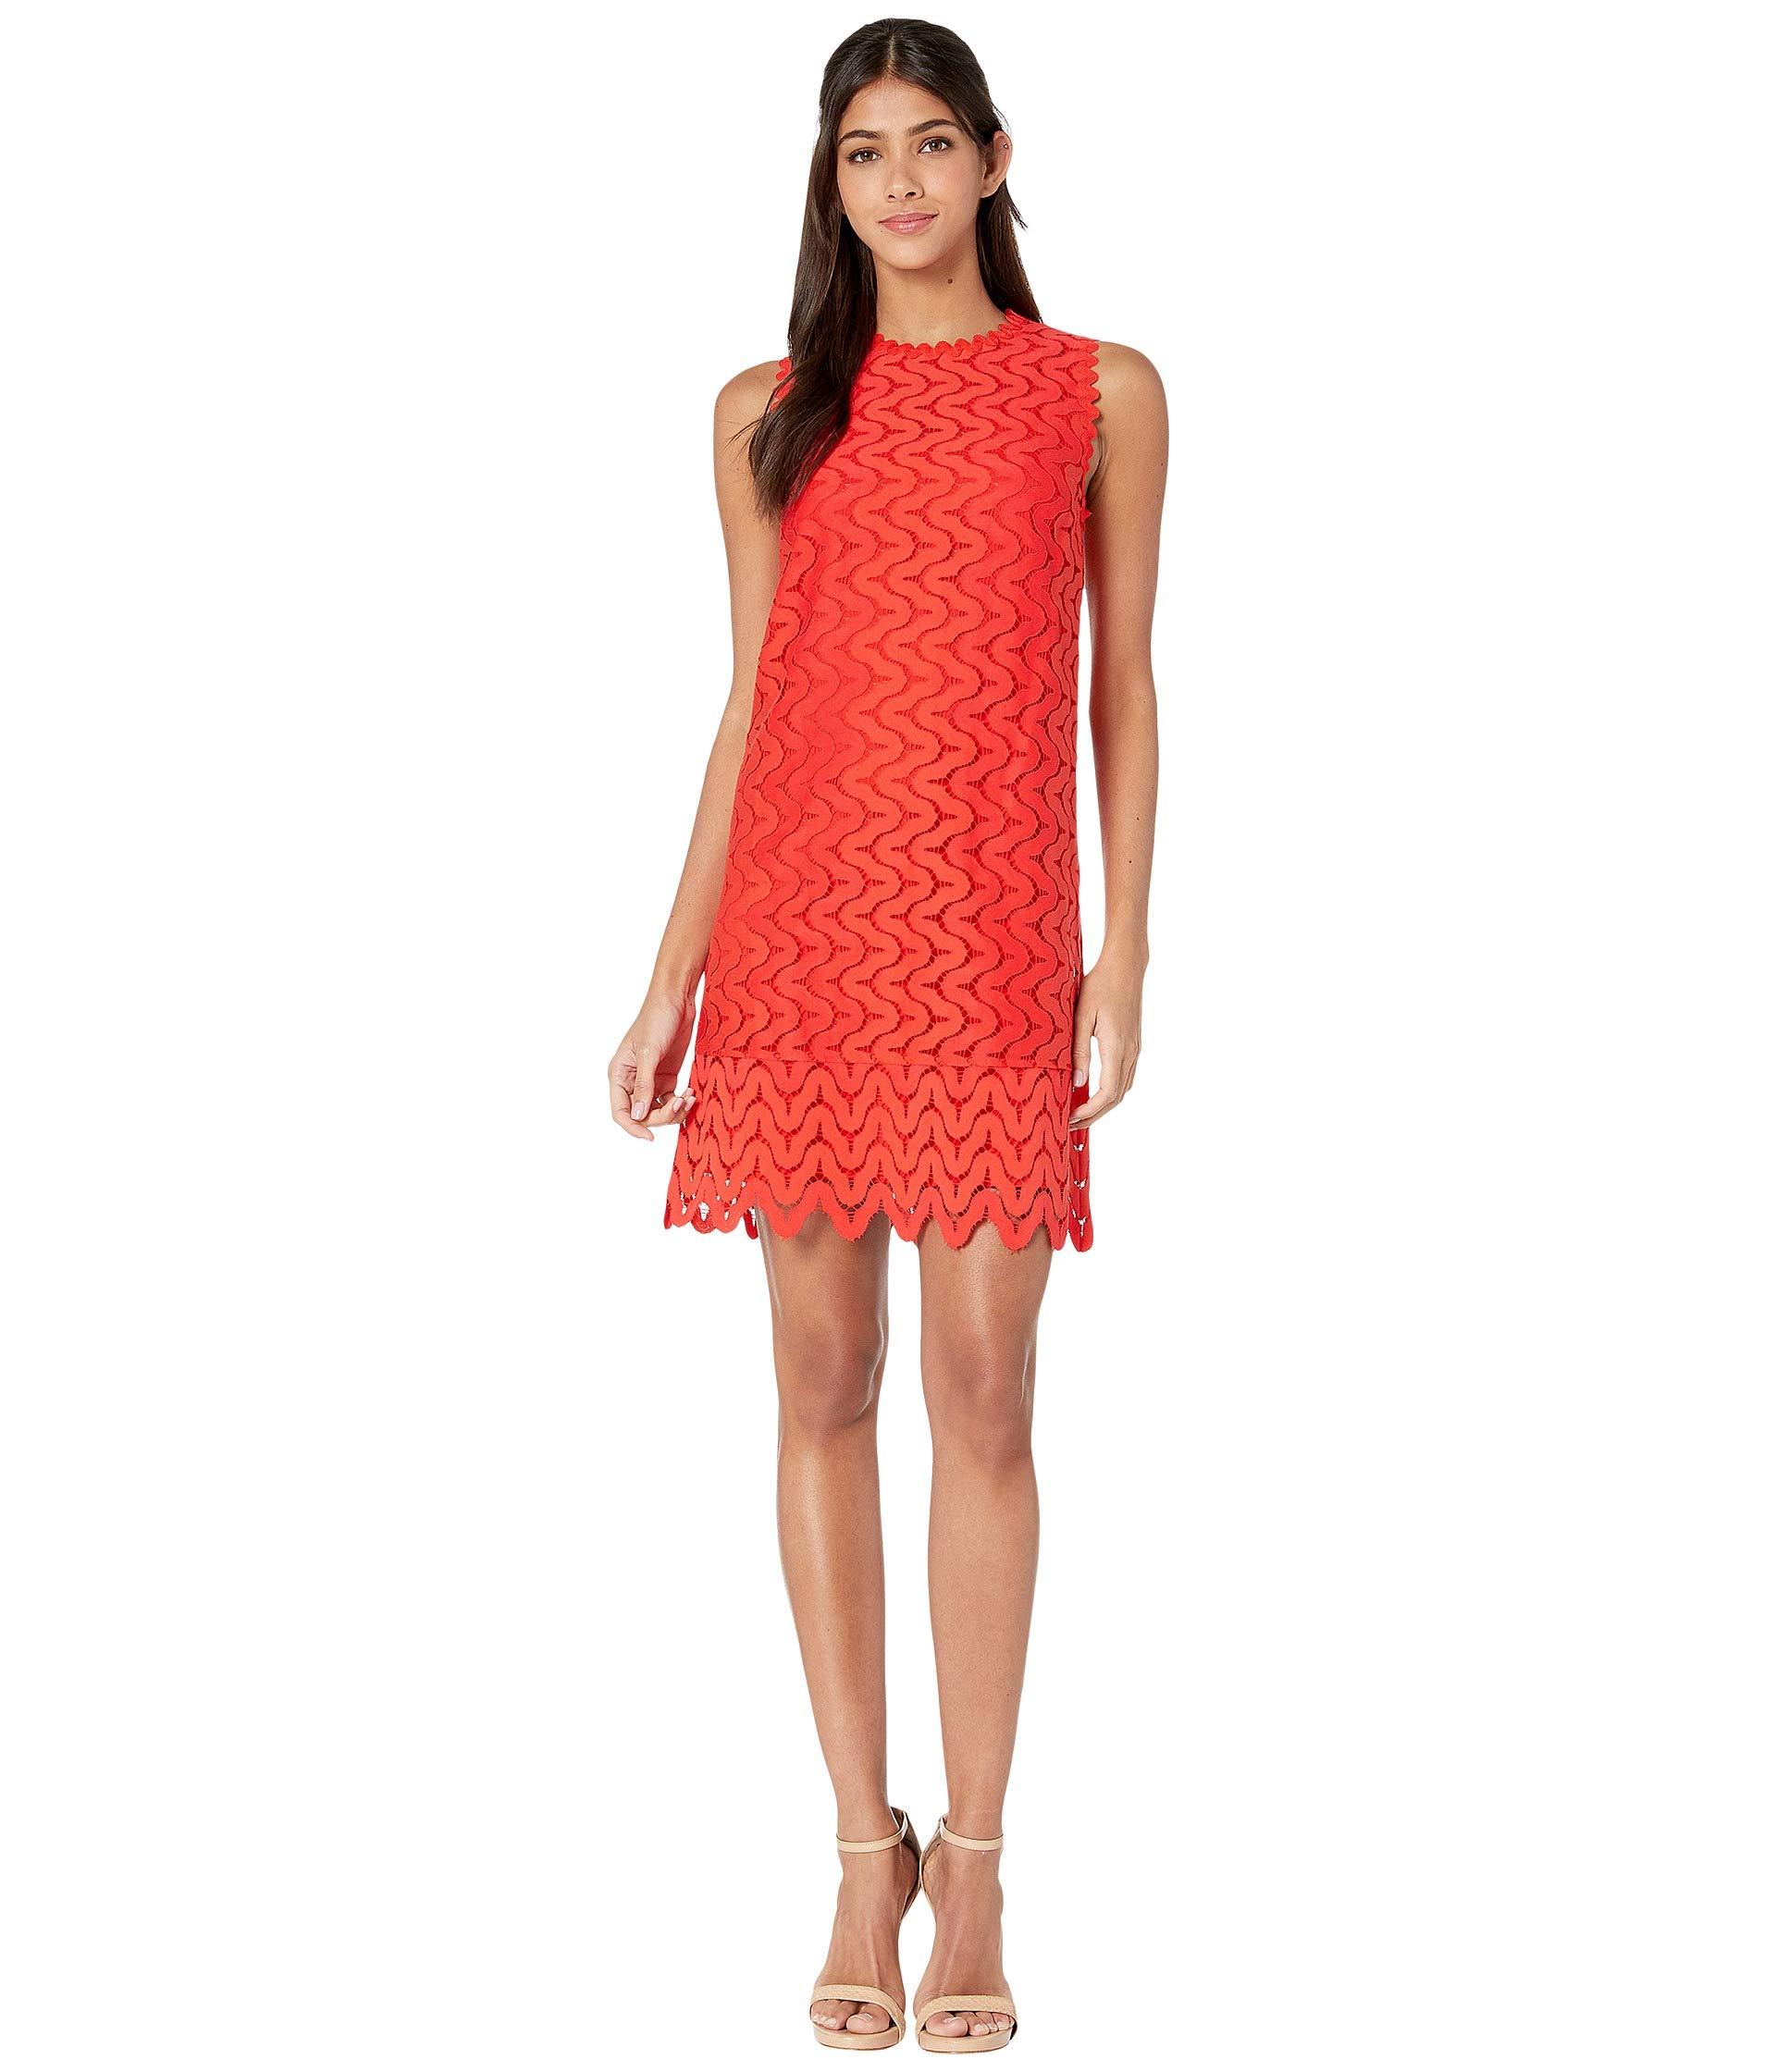 Kate Spade Sand Dune Lace Shift Dress in Red - Lyst